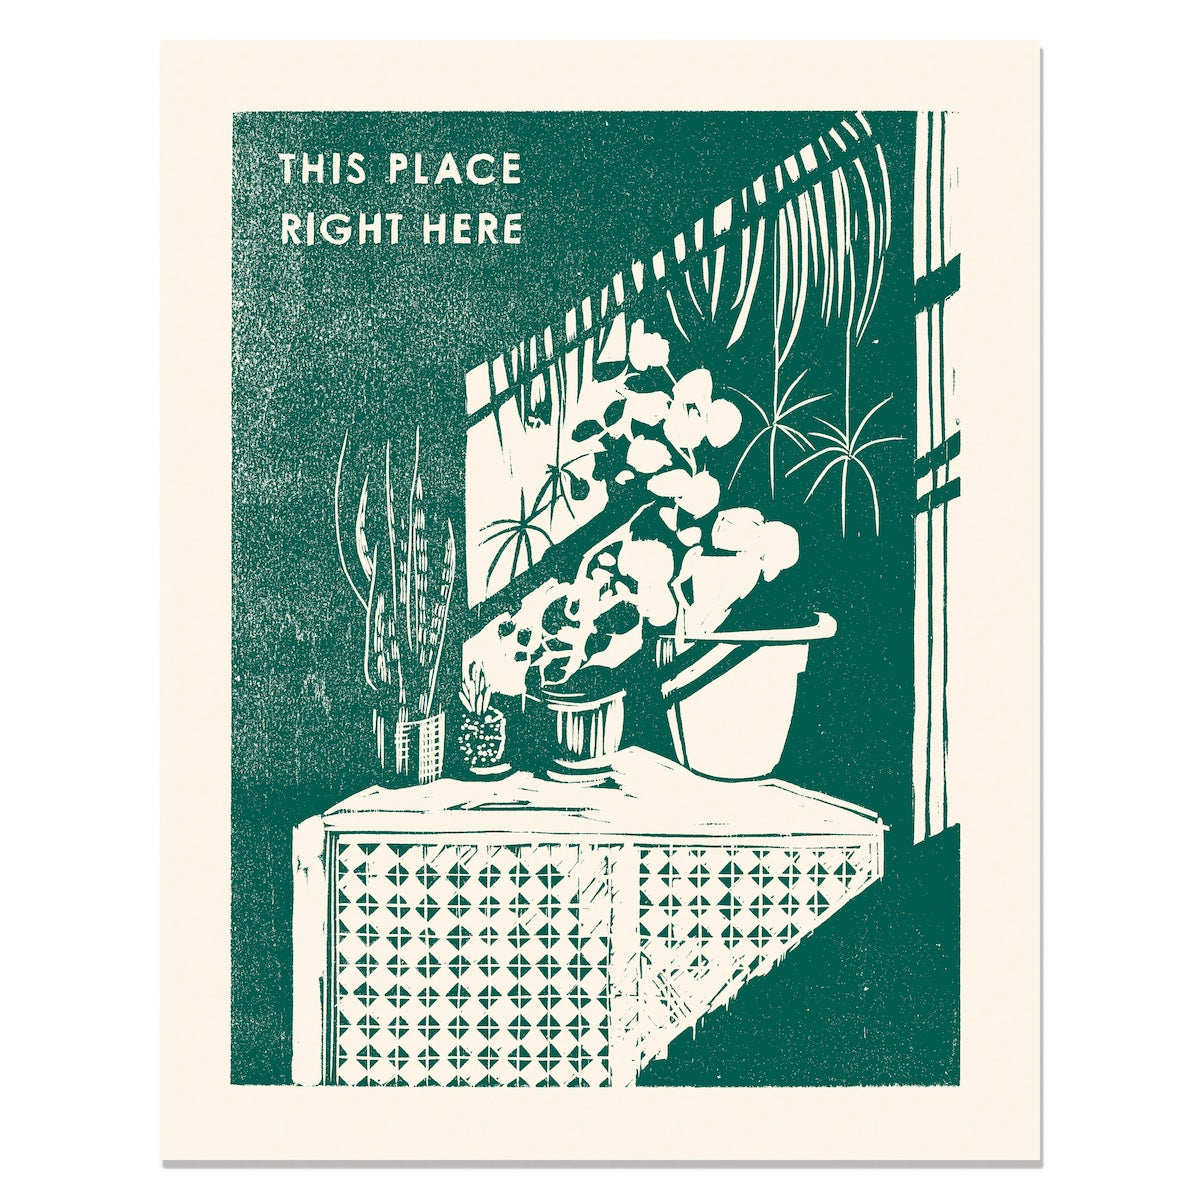 This Place Right Here Art Print - P I C N I C 